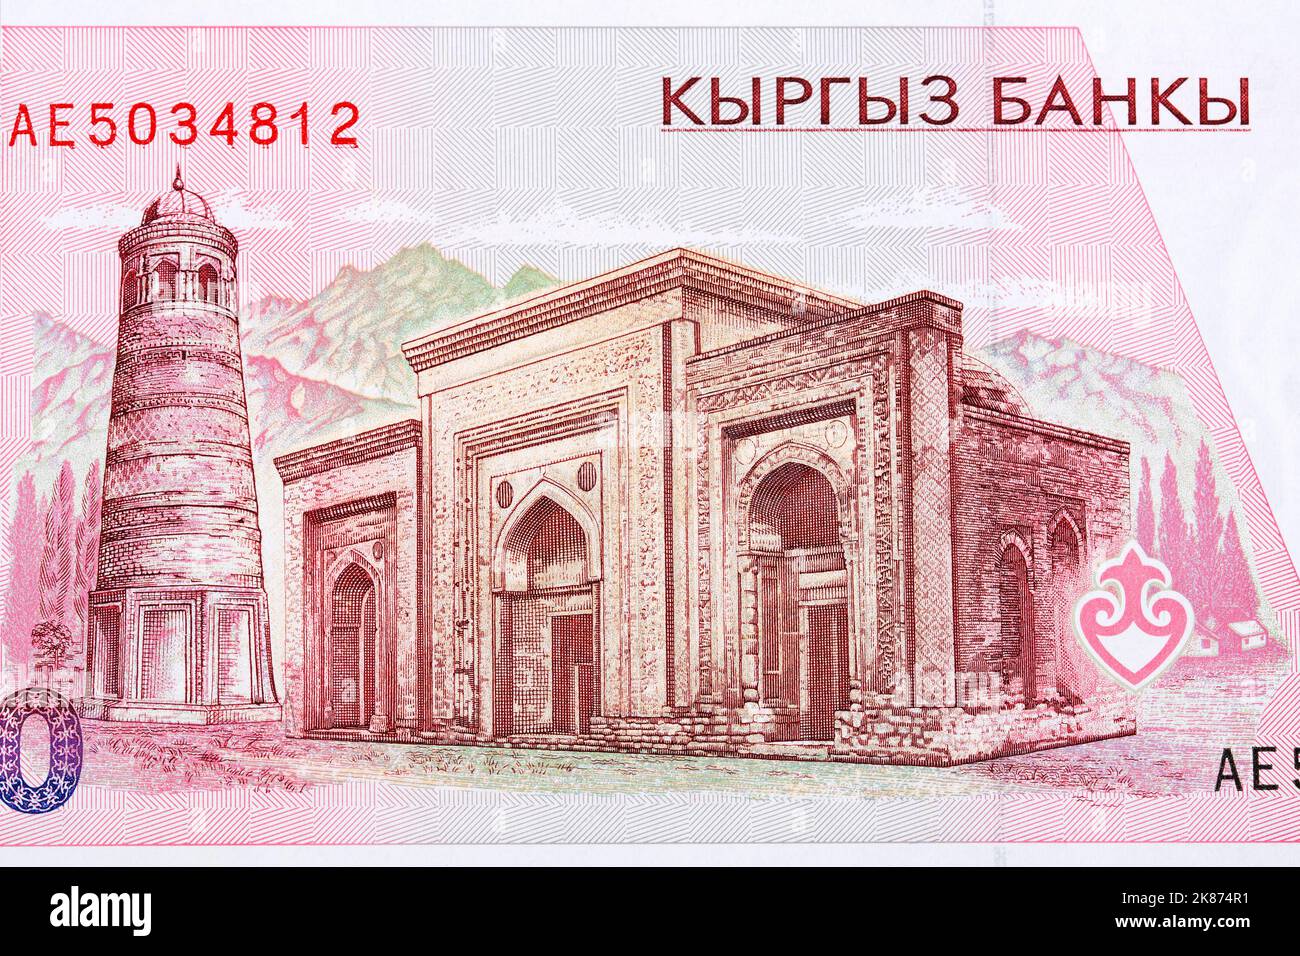 Uzgen architectural complex of the 11-12th centurie from Kyrgyzstani money - Som Stock Photo